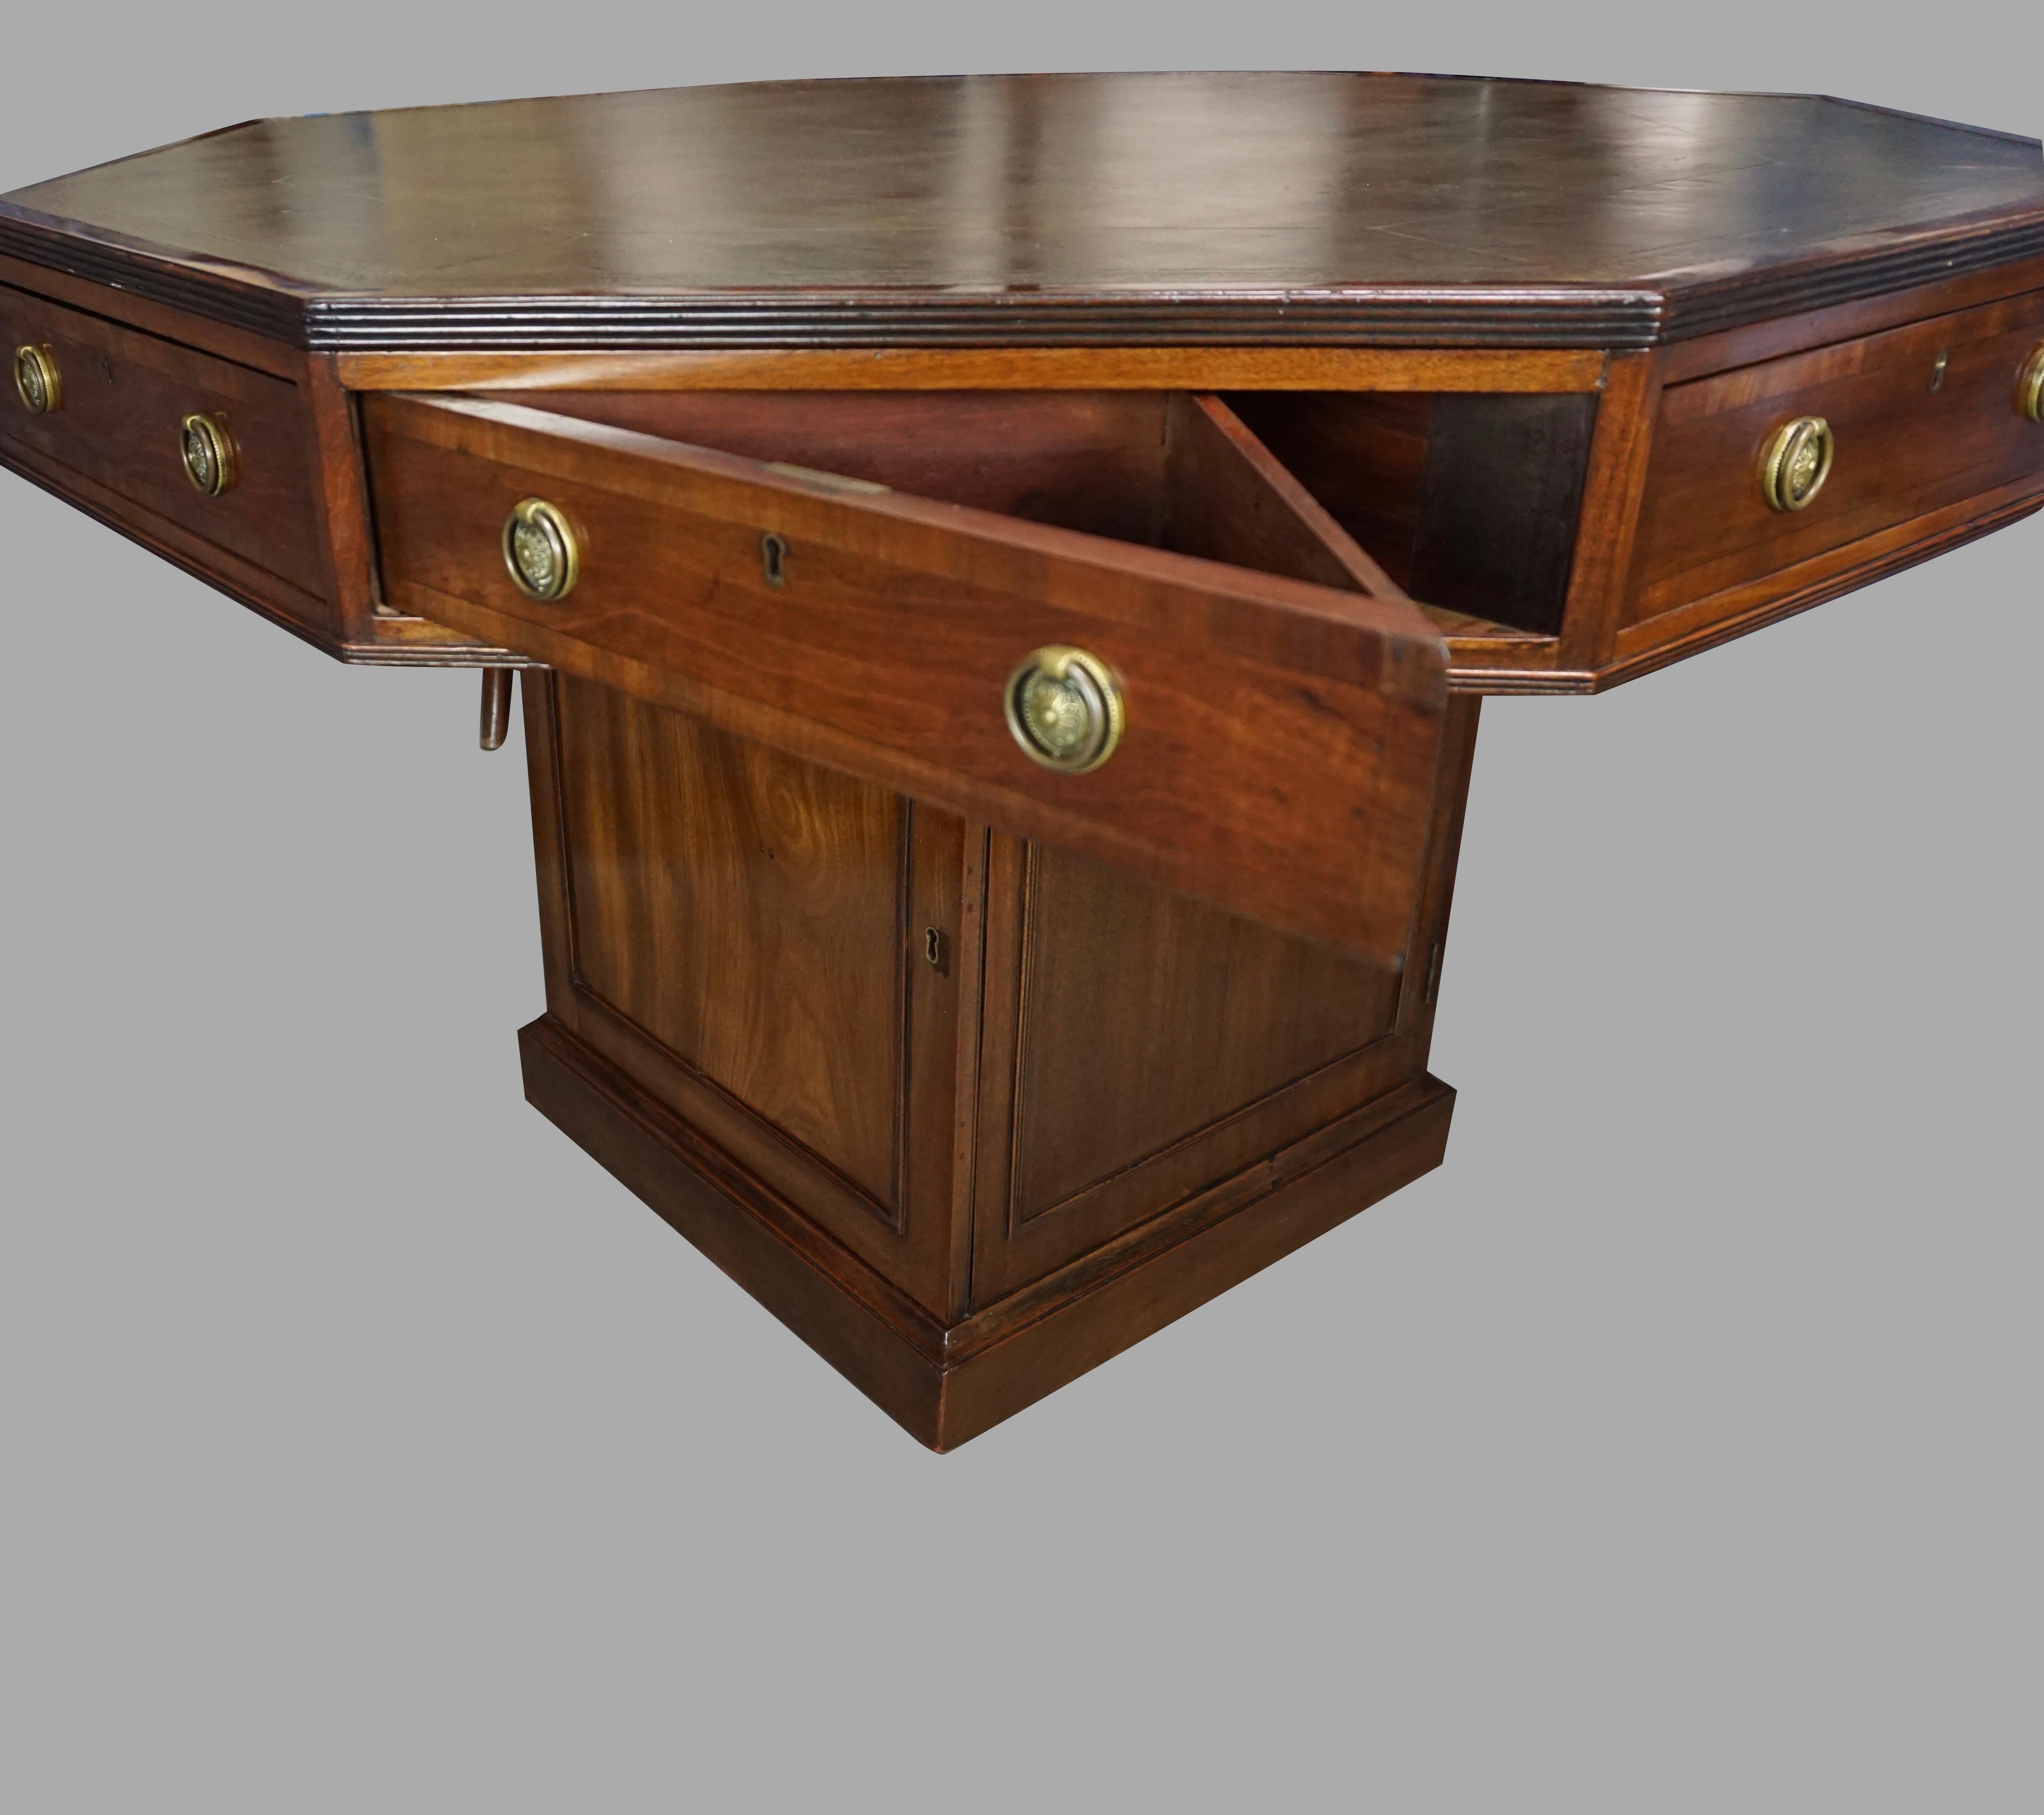 A fine quality English Georgian style drum or rent table, the gilt-tooled green leather covered octagonal top above 8 functional drawers, 4 pie shaped and 4 rectangular, supported on a square base with 2 opposing functional cupboard doors, on